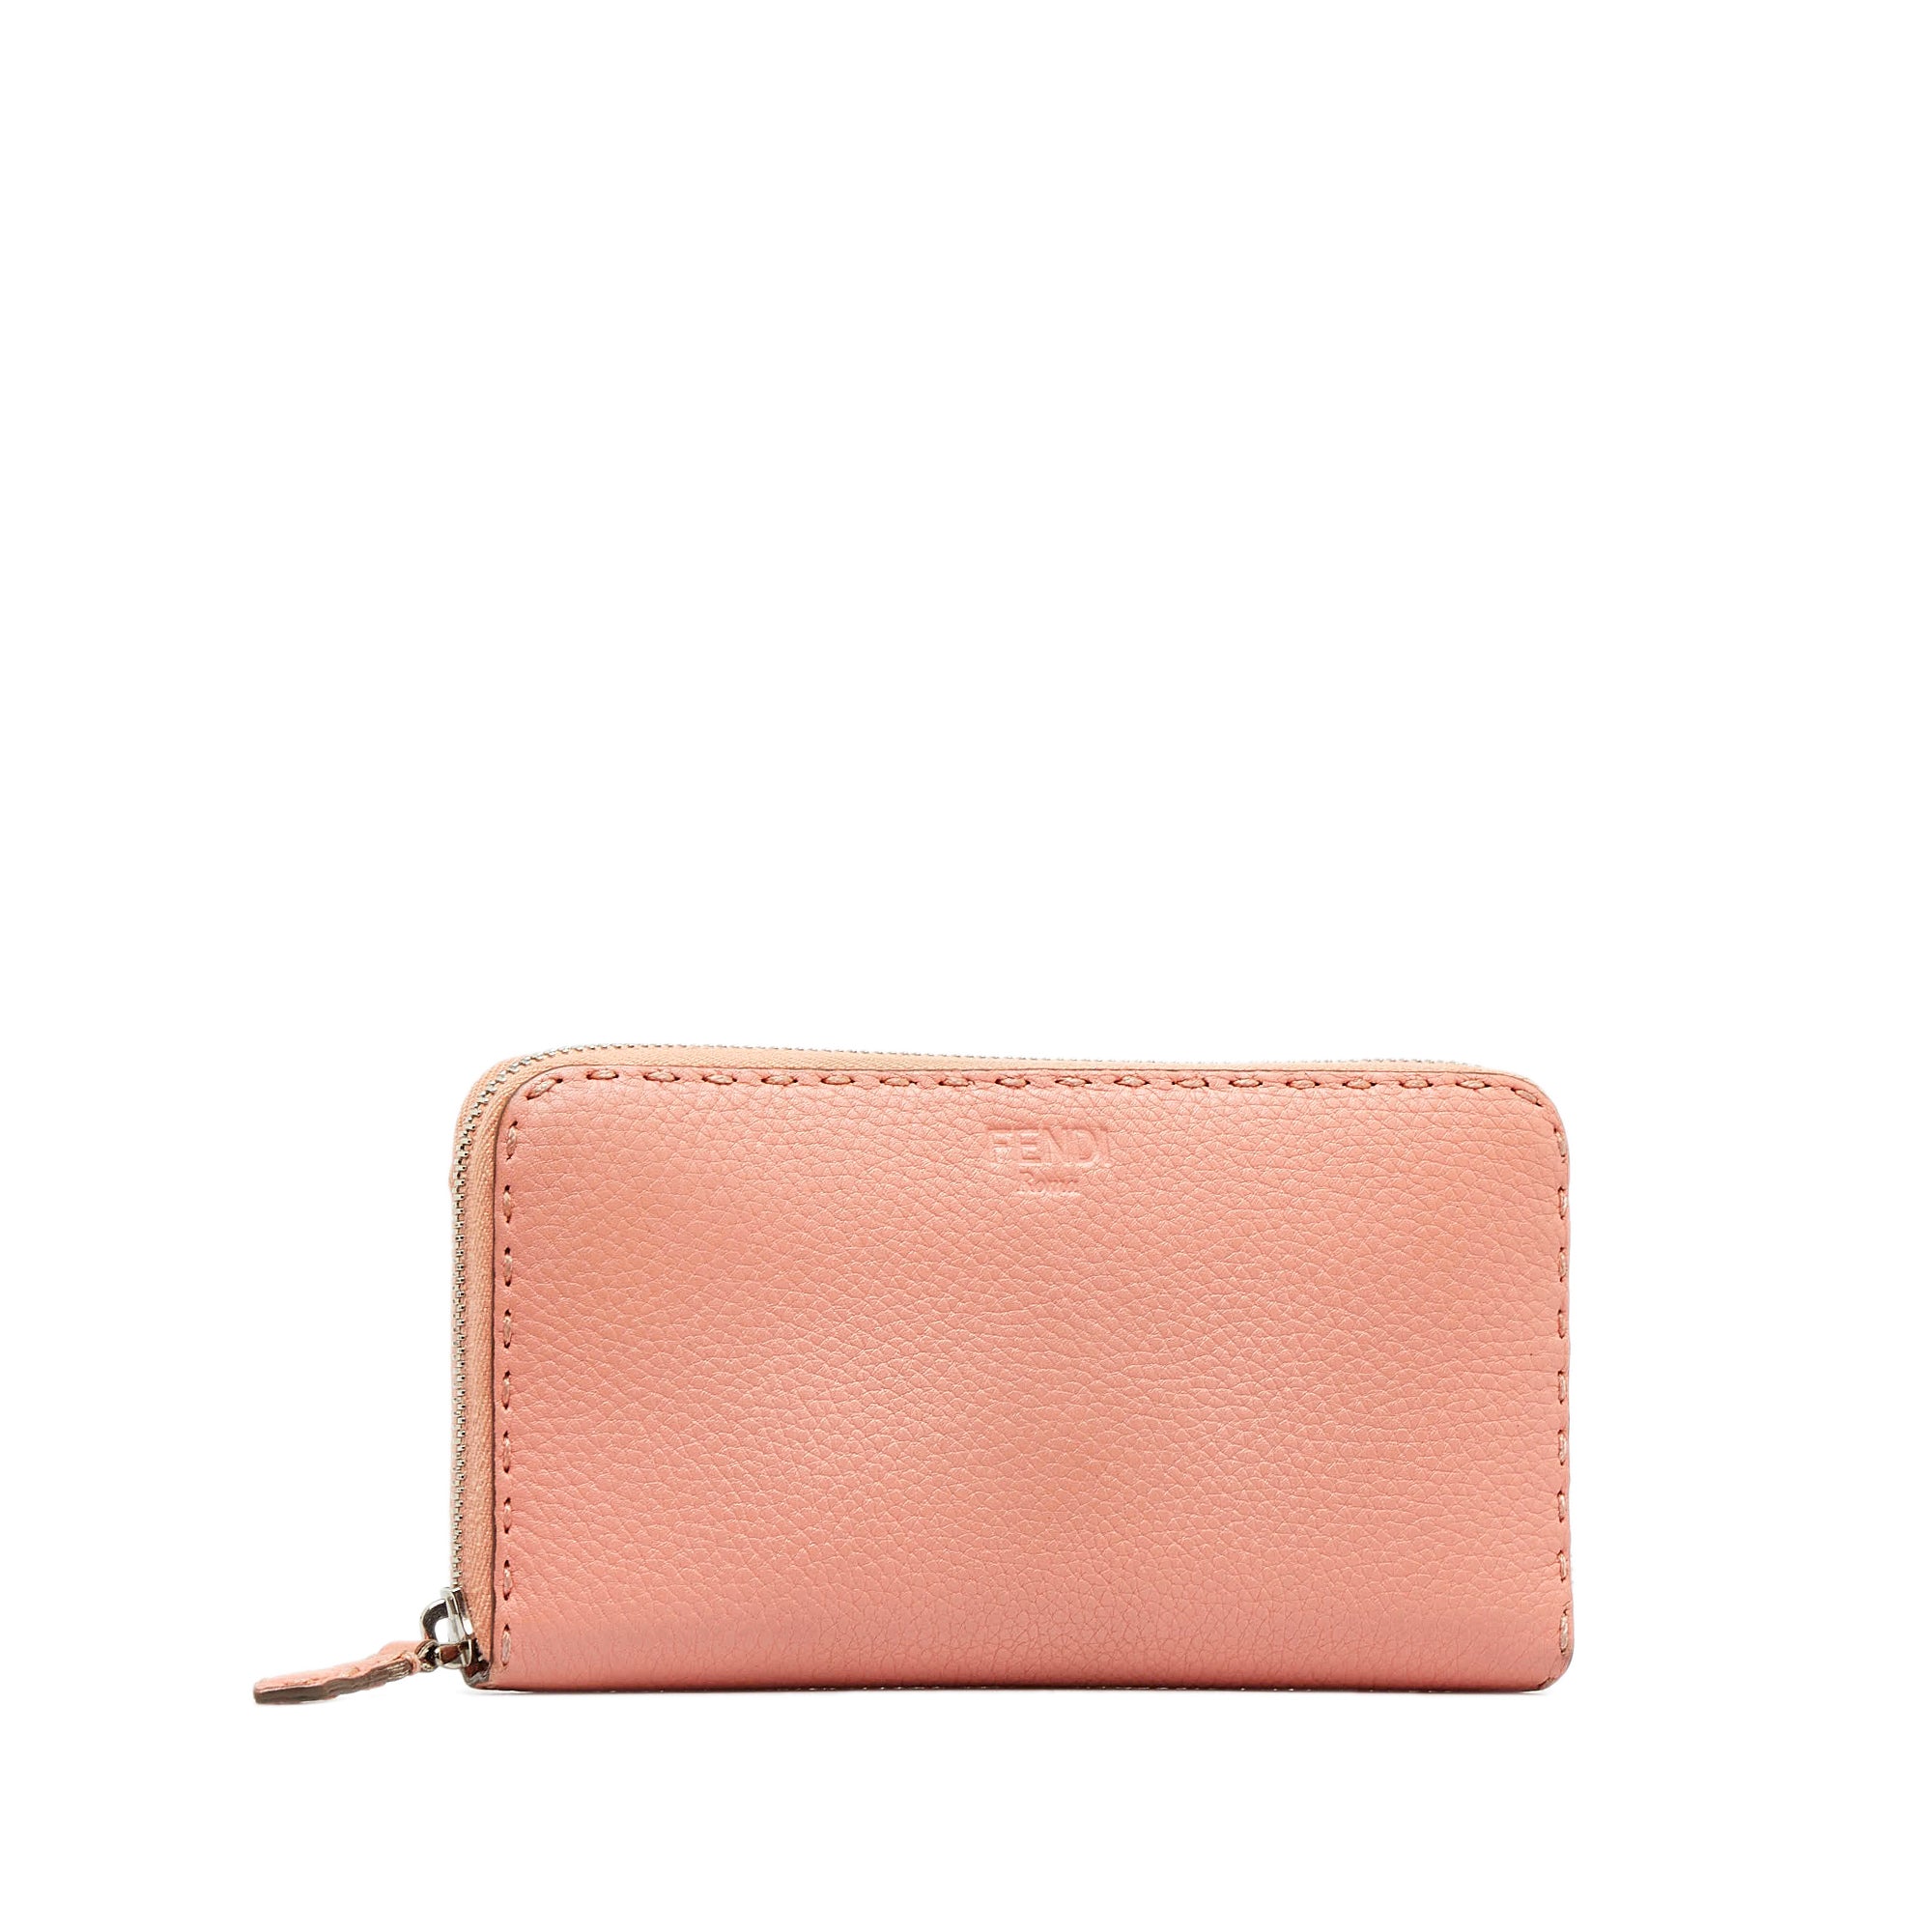 Coach - Authenticated Wallet - Leather Pink Plain for Women, Good Condition